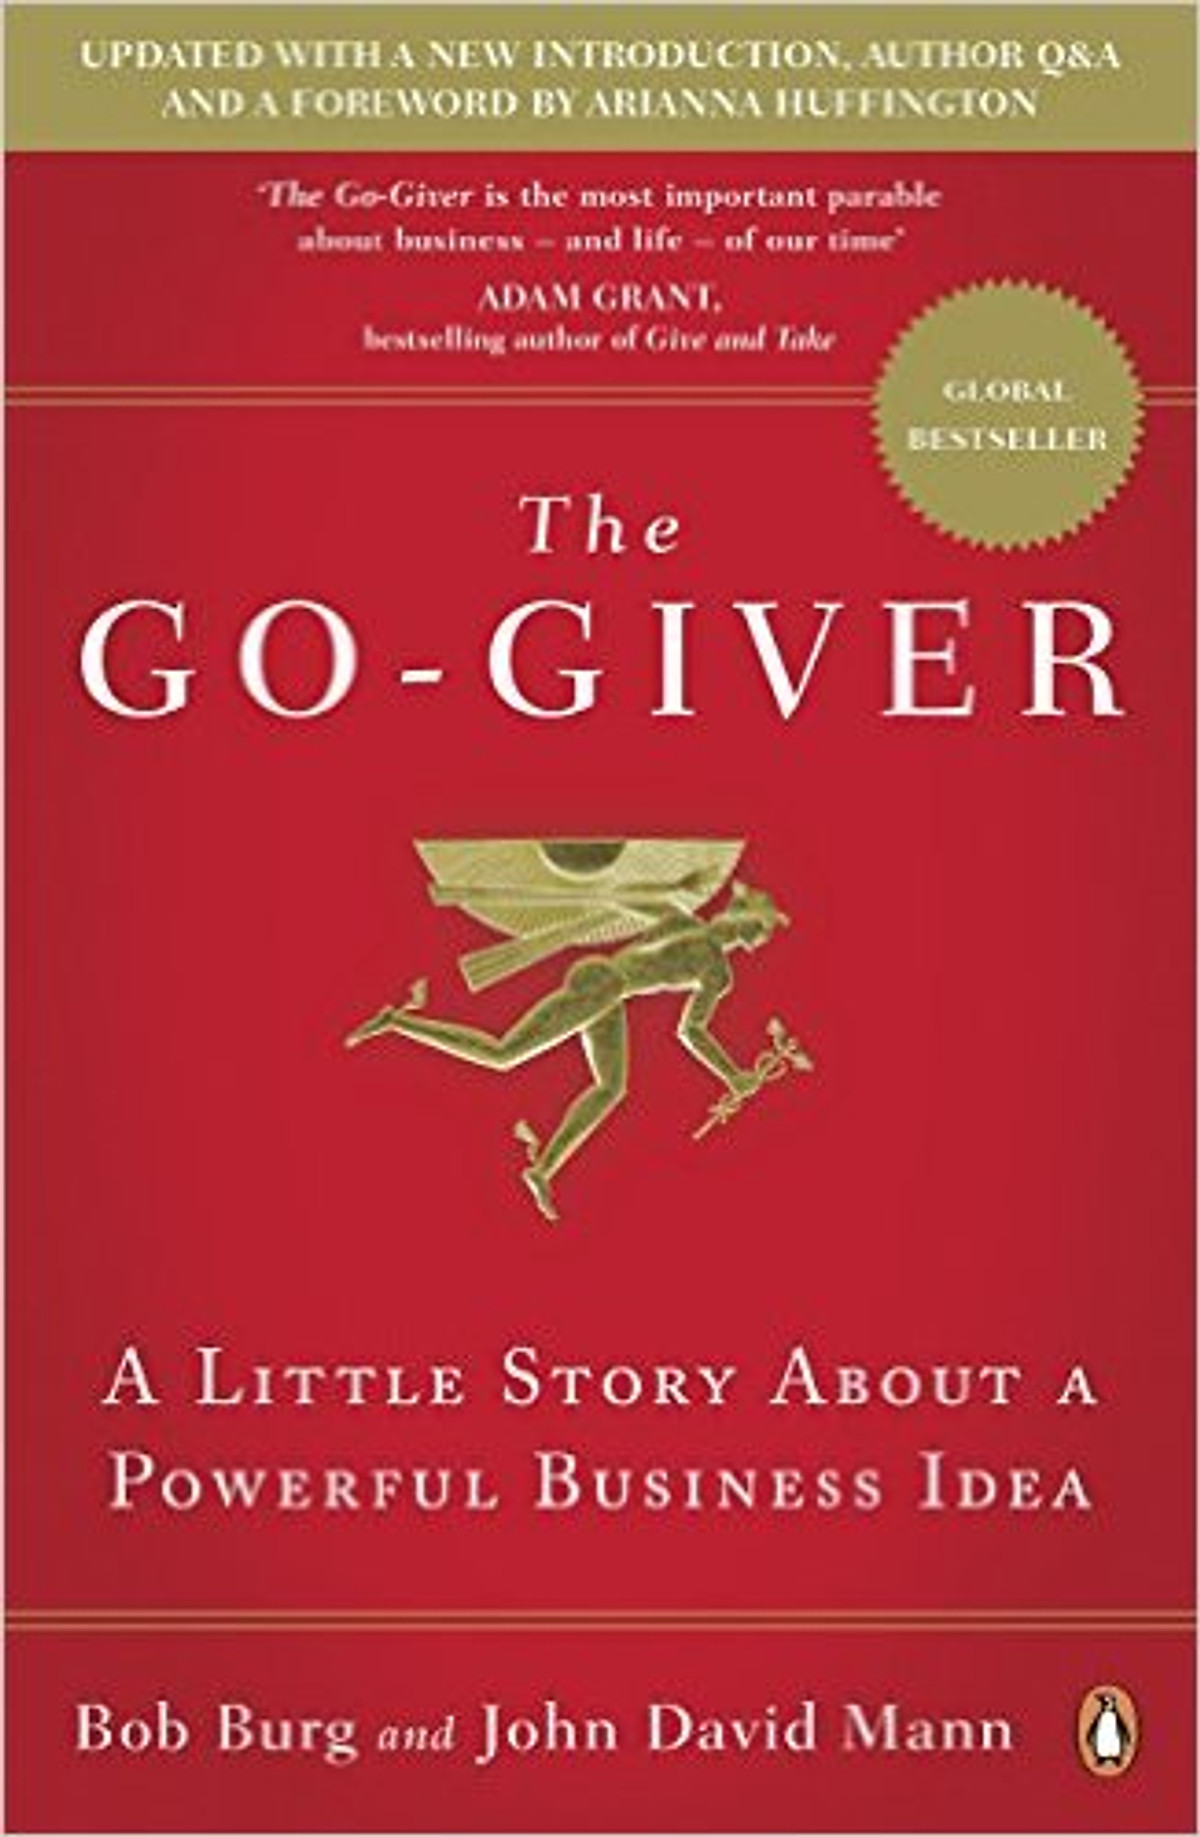 The Go-Giver: A Little Story About A Powerful Business Idea - Paperback